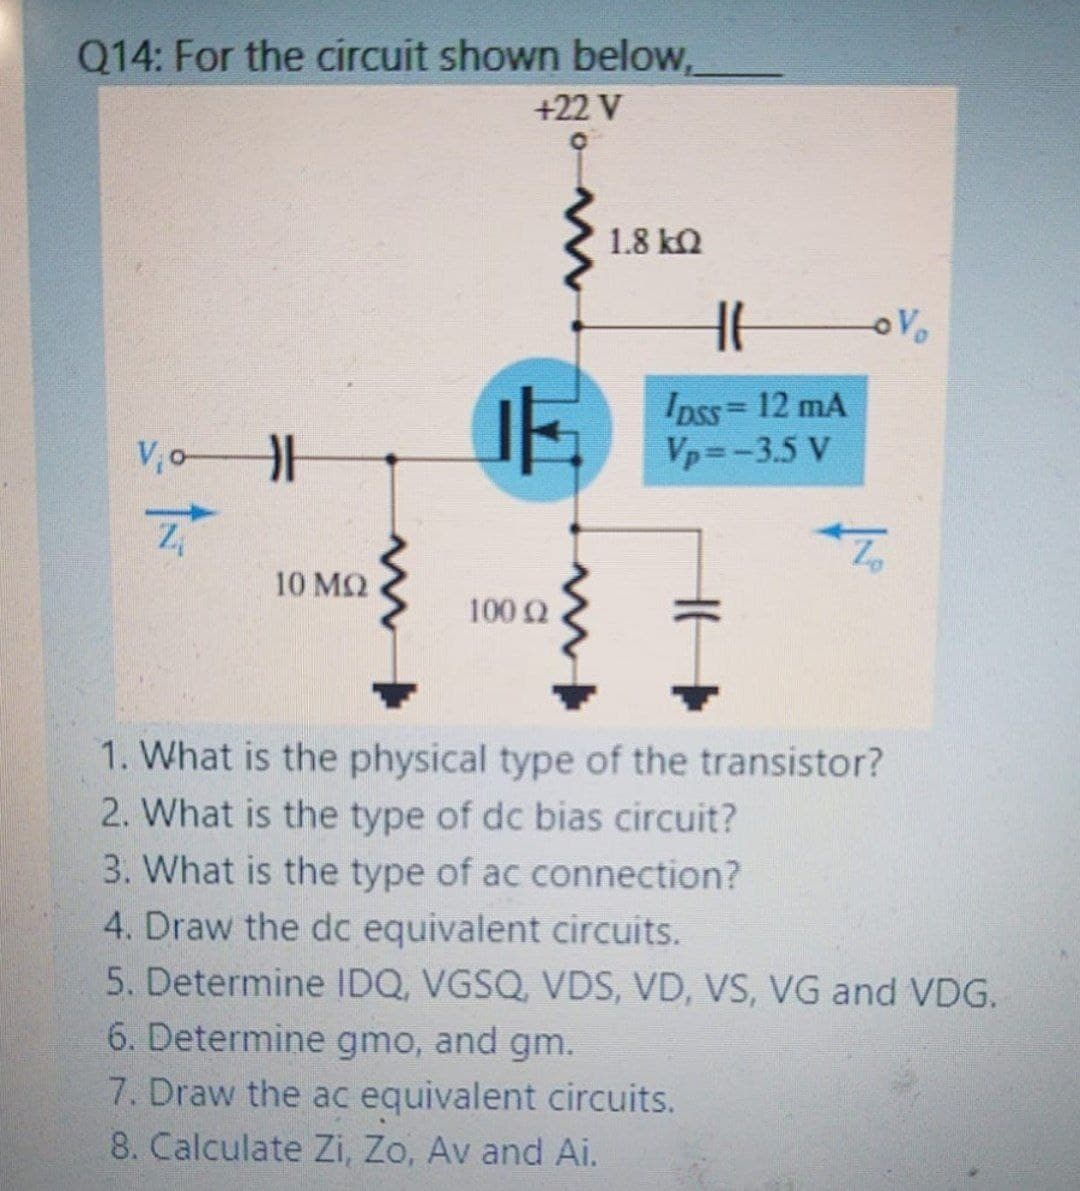 Q14: For the circuit shown below,
+22 V
1.8 kQ
Ipss= 12 mA
Vp=-3.5 V
VoH
10 MQ
1002
1. What is the physical type of the transistor?
2. What is the type of dc bias circuit?
3. What is the type of ac connection?
4. Draw the dc equivalent circuits.
5. Determine IDQ, VGSQ, VDS, VD, VS, VG and VDG.
6. Determine gmo, and gm.
7. Draw the ac equivalent circuits.
8. Calculate Zi, Zo, Av and Ai.
